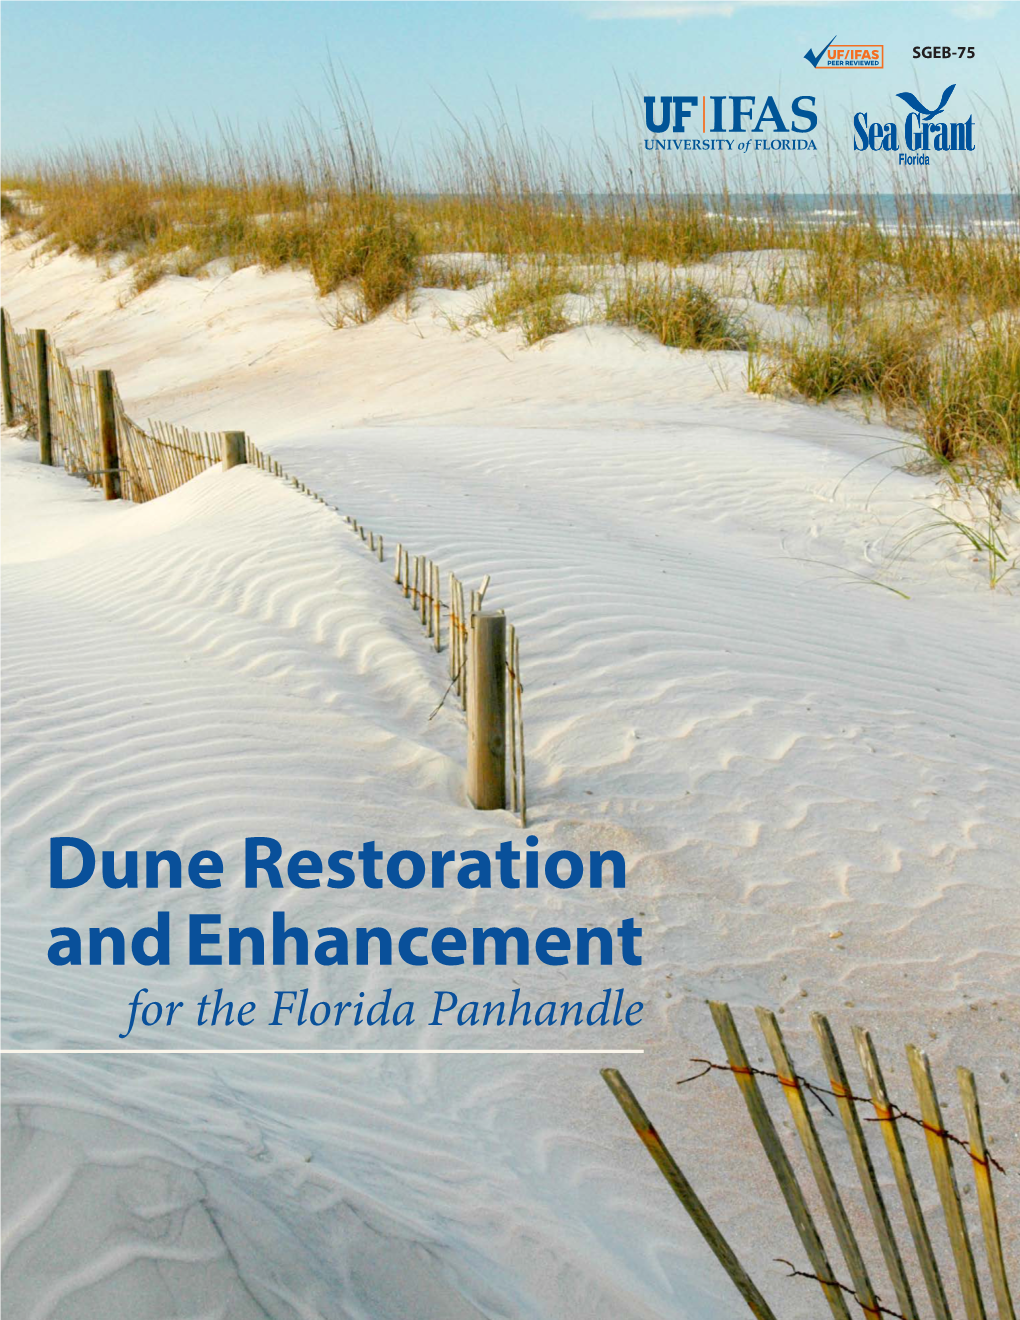 Dune Restoration and Enhancement for the Florida Panhandle